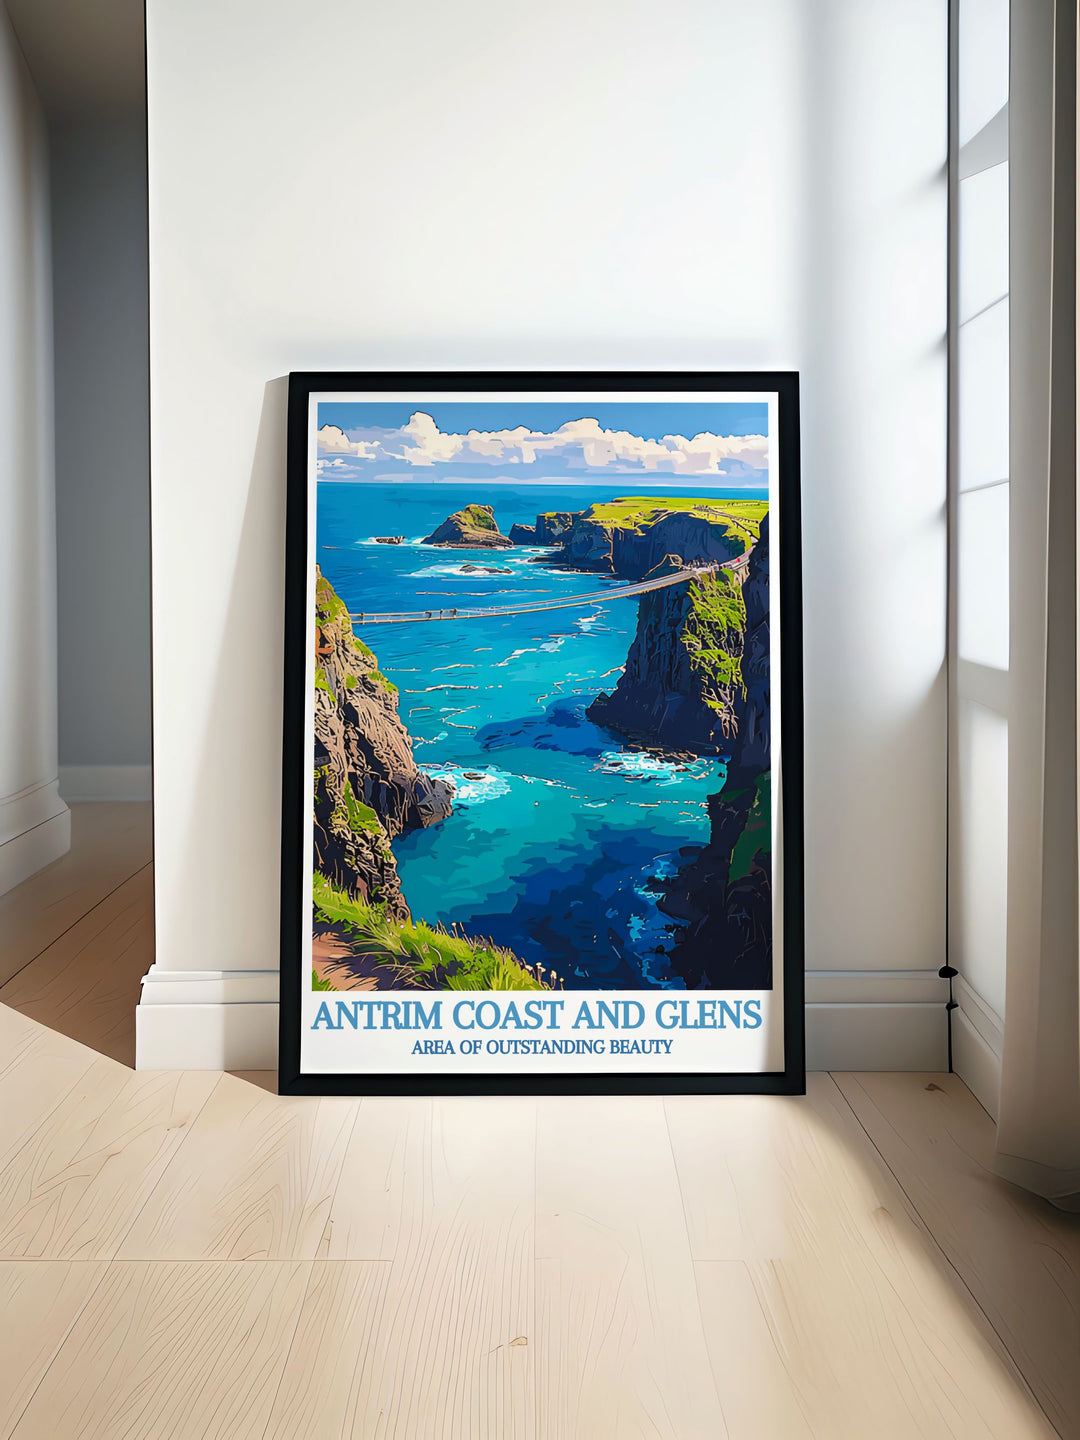 Fine art print of Antrim Coast and Glens AONB showcasing the stunning natural landscapes of Northern Ireland, perfect for home or office decor.